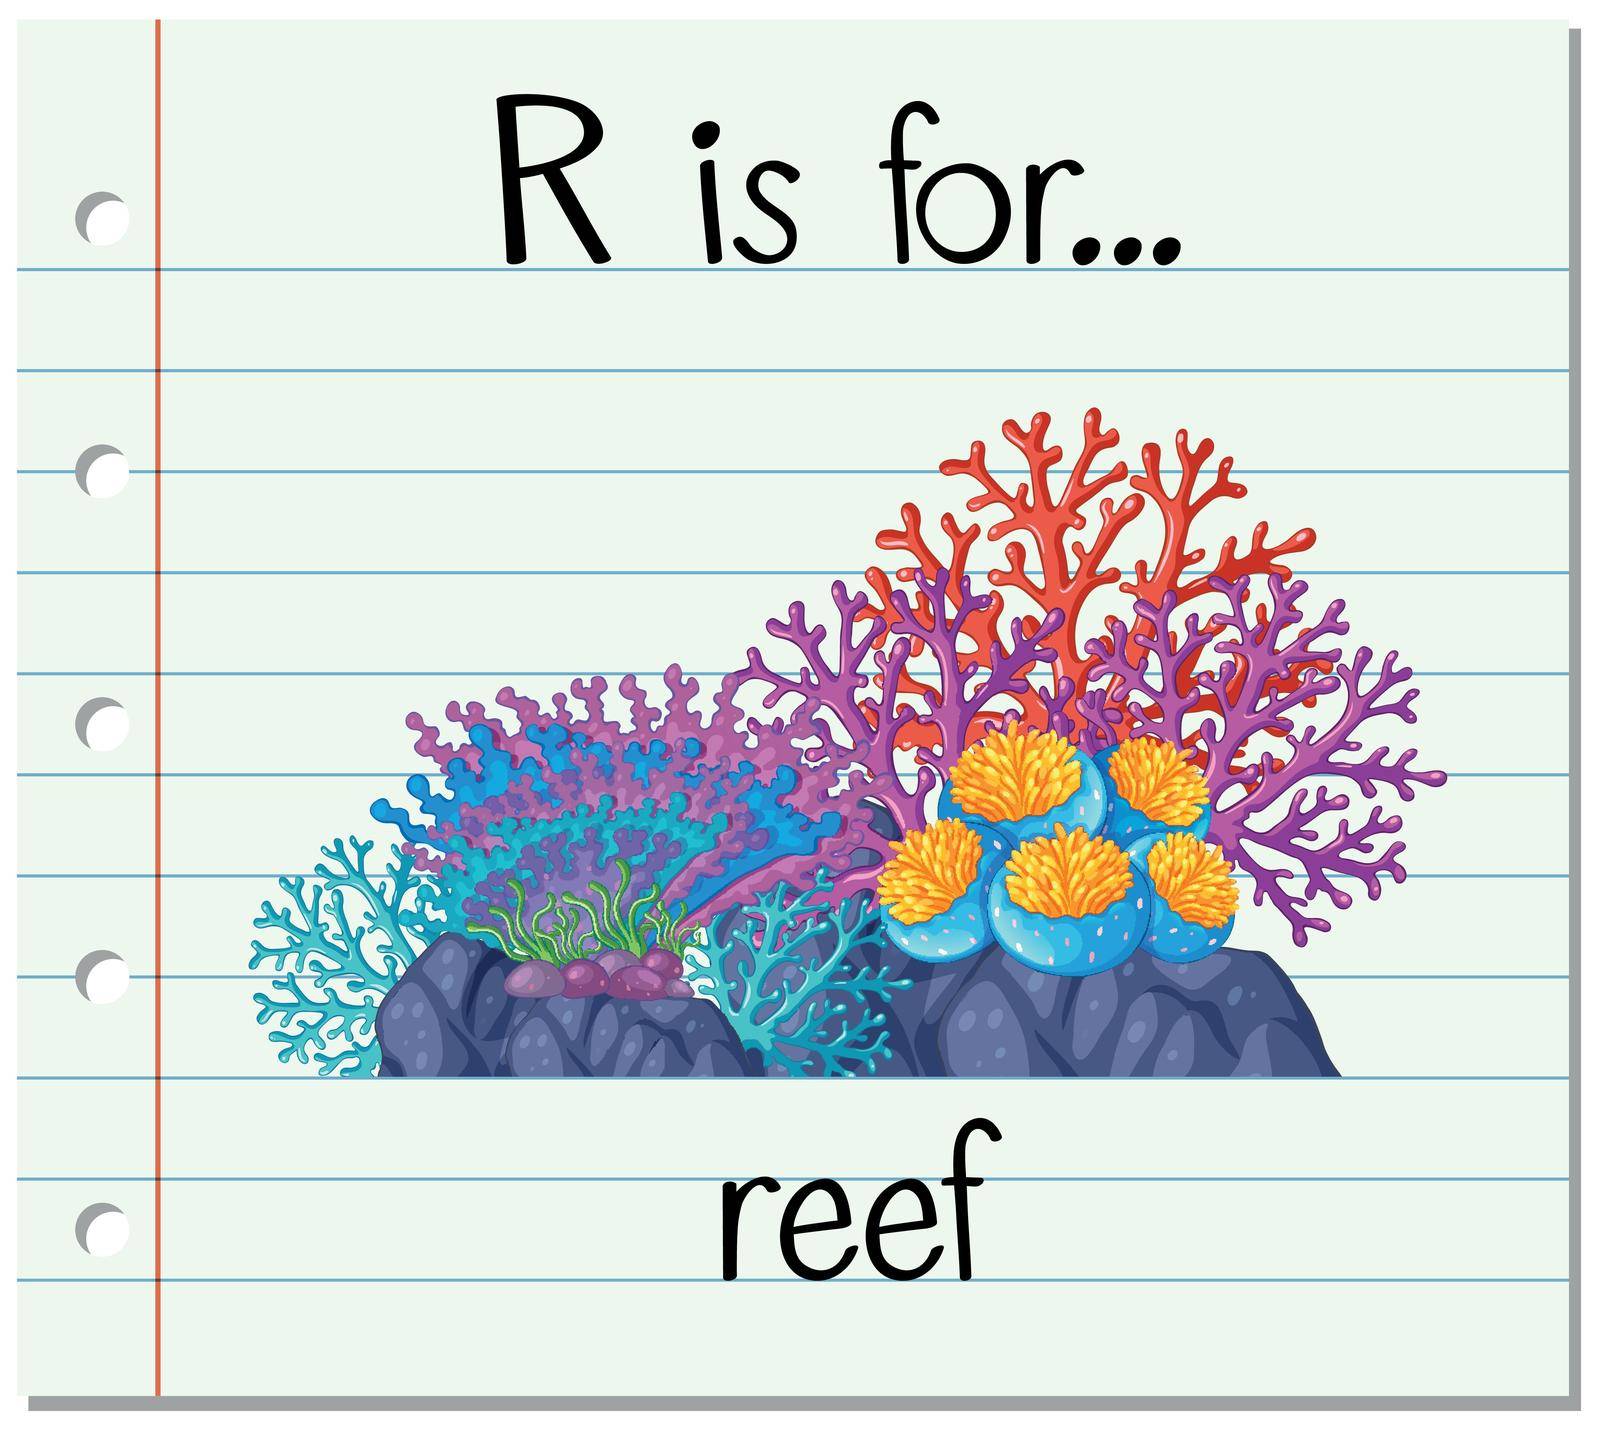 Flashcard letter R is for reef illustration